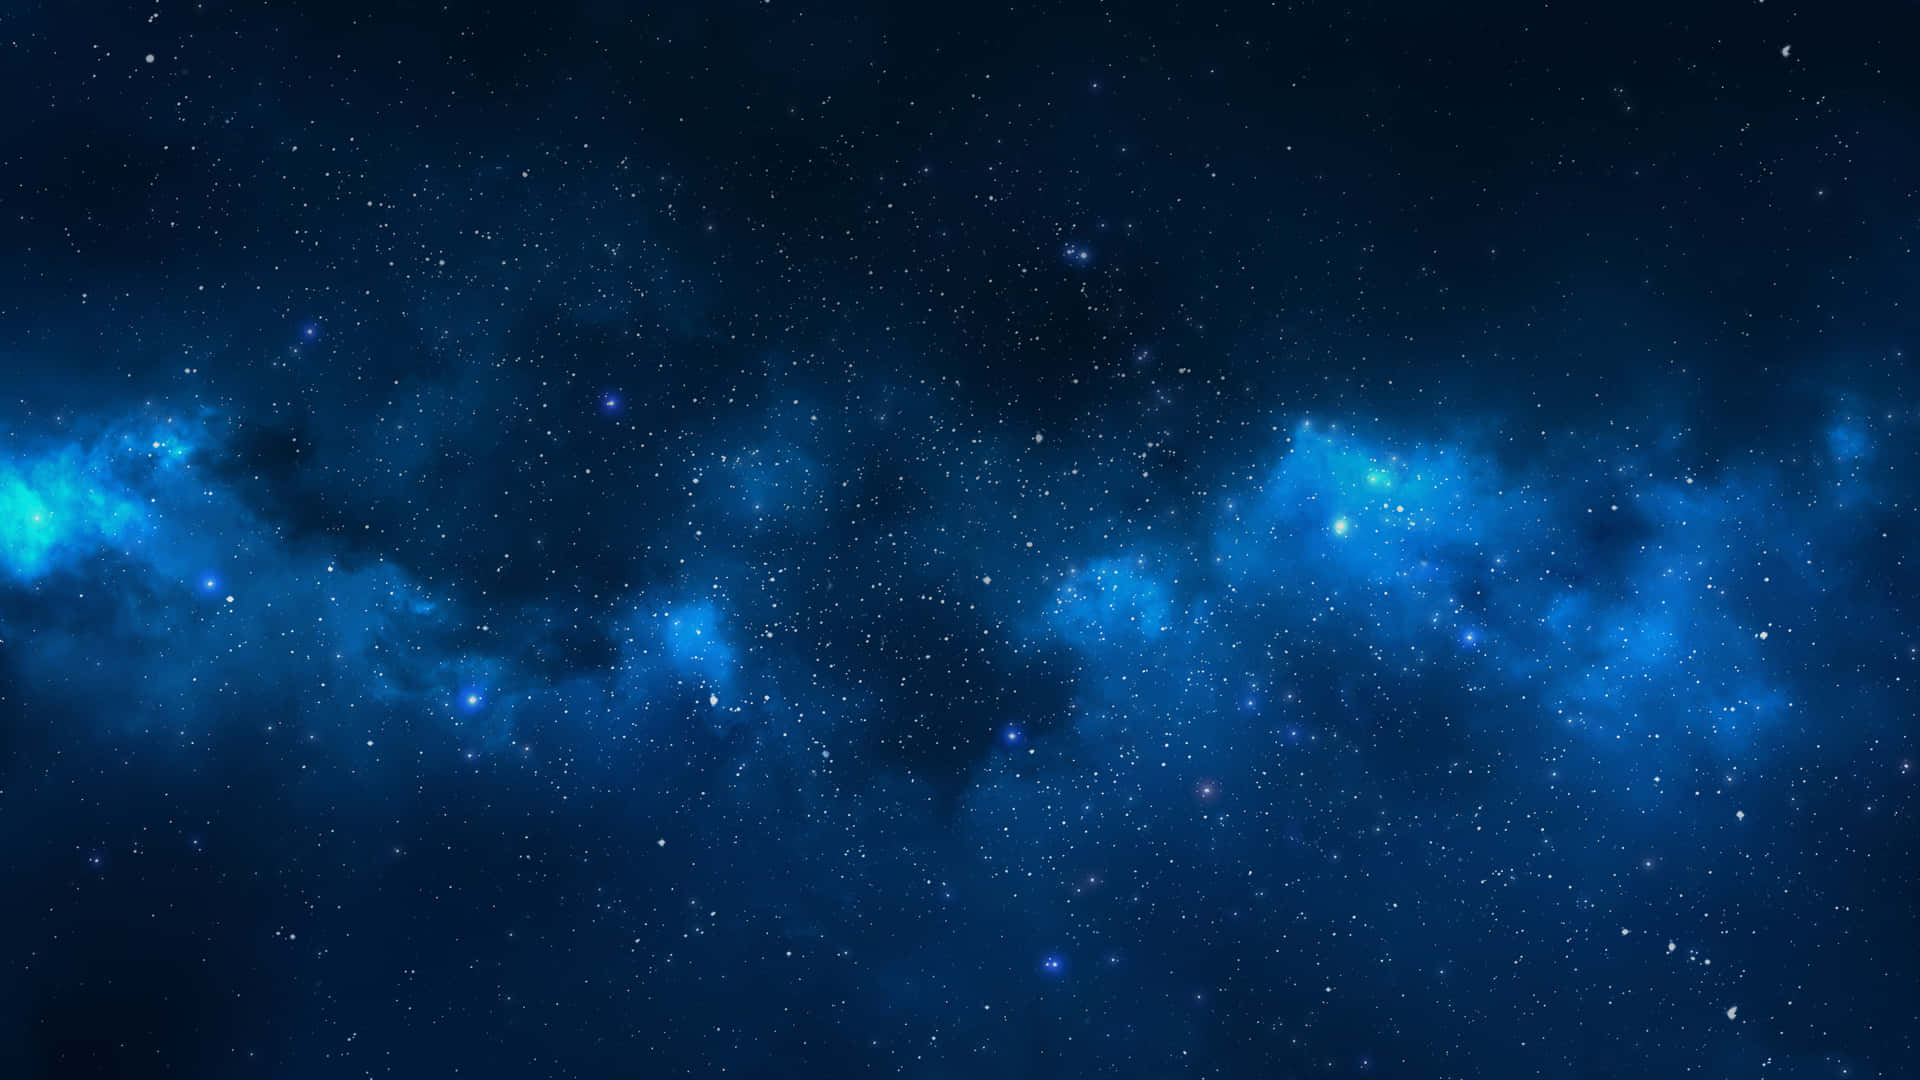 Explore the universe and its astrological wonders. Wallpaper